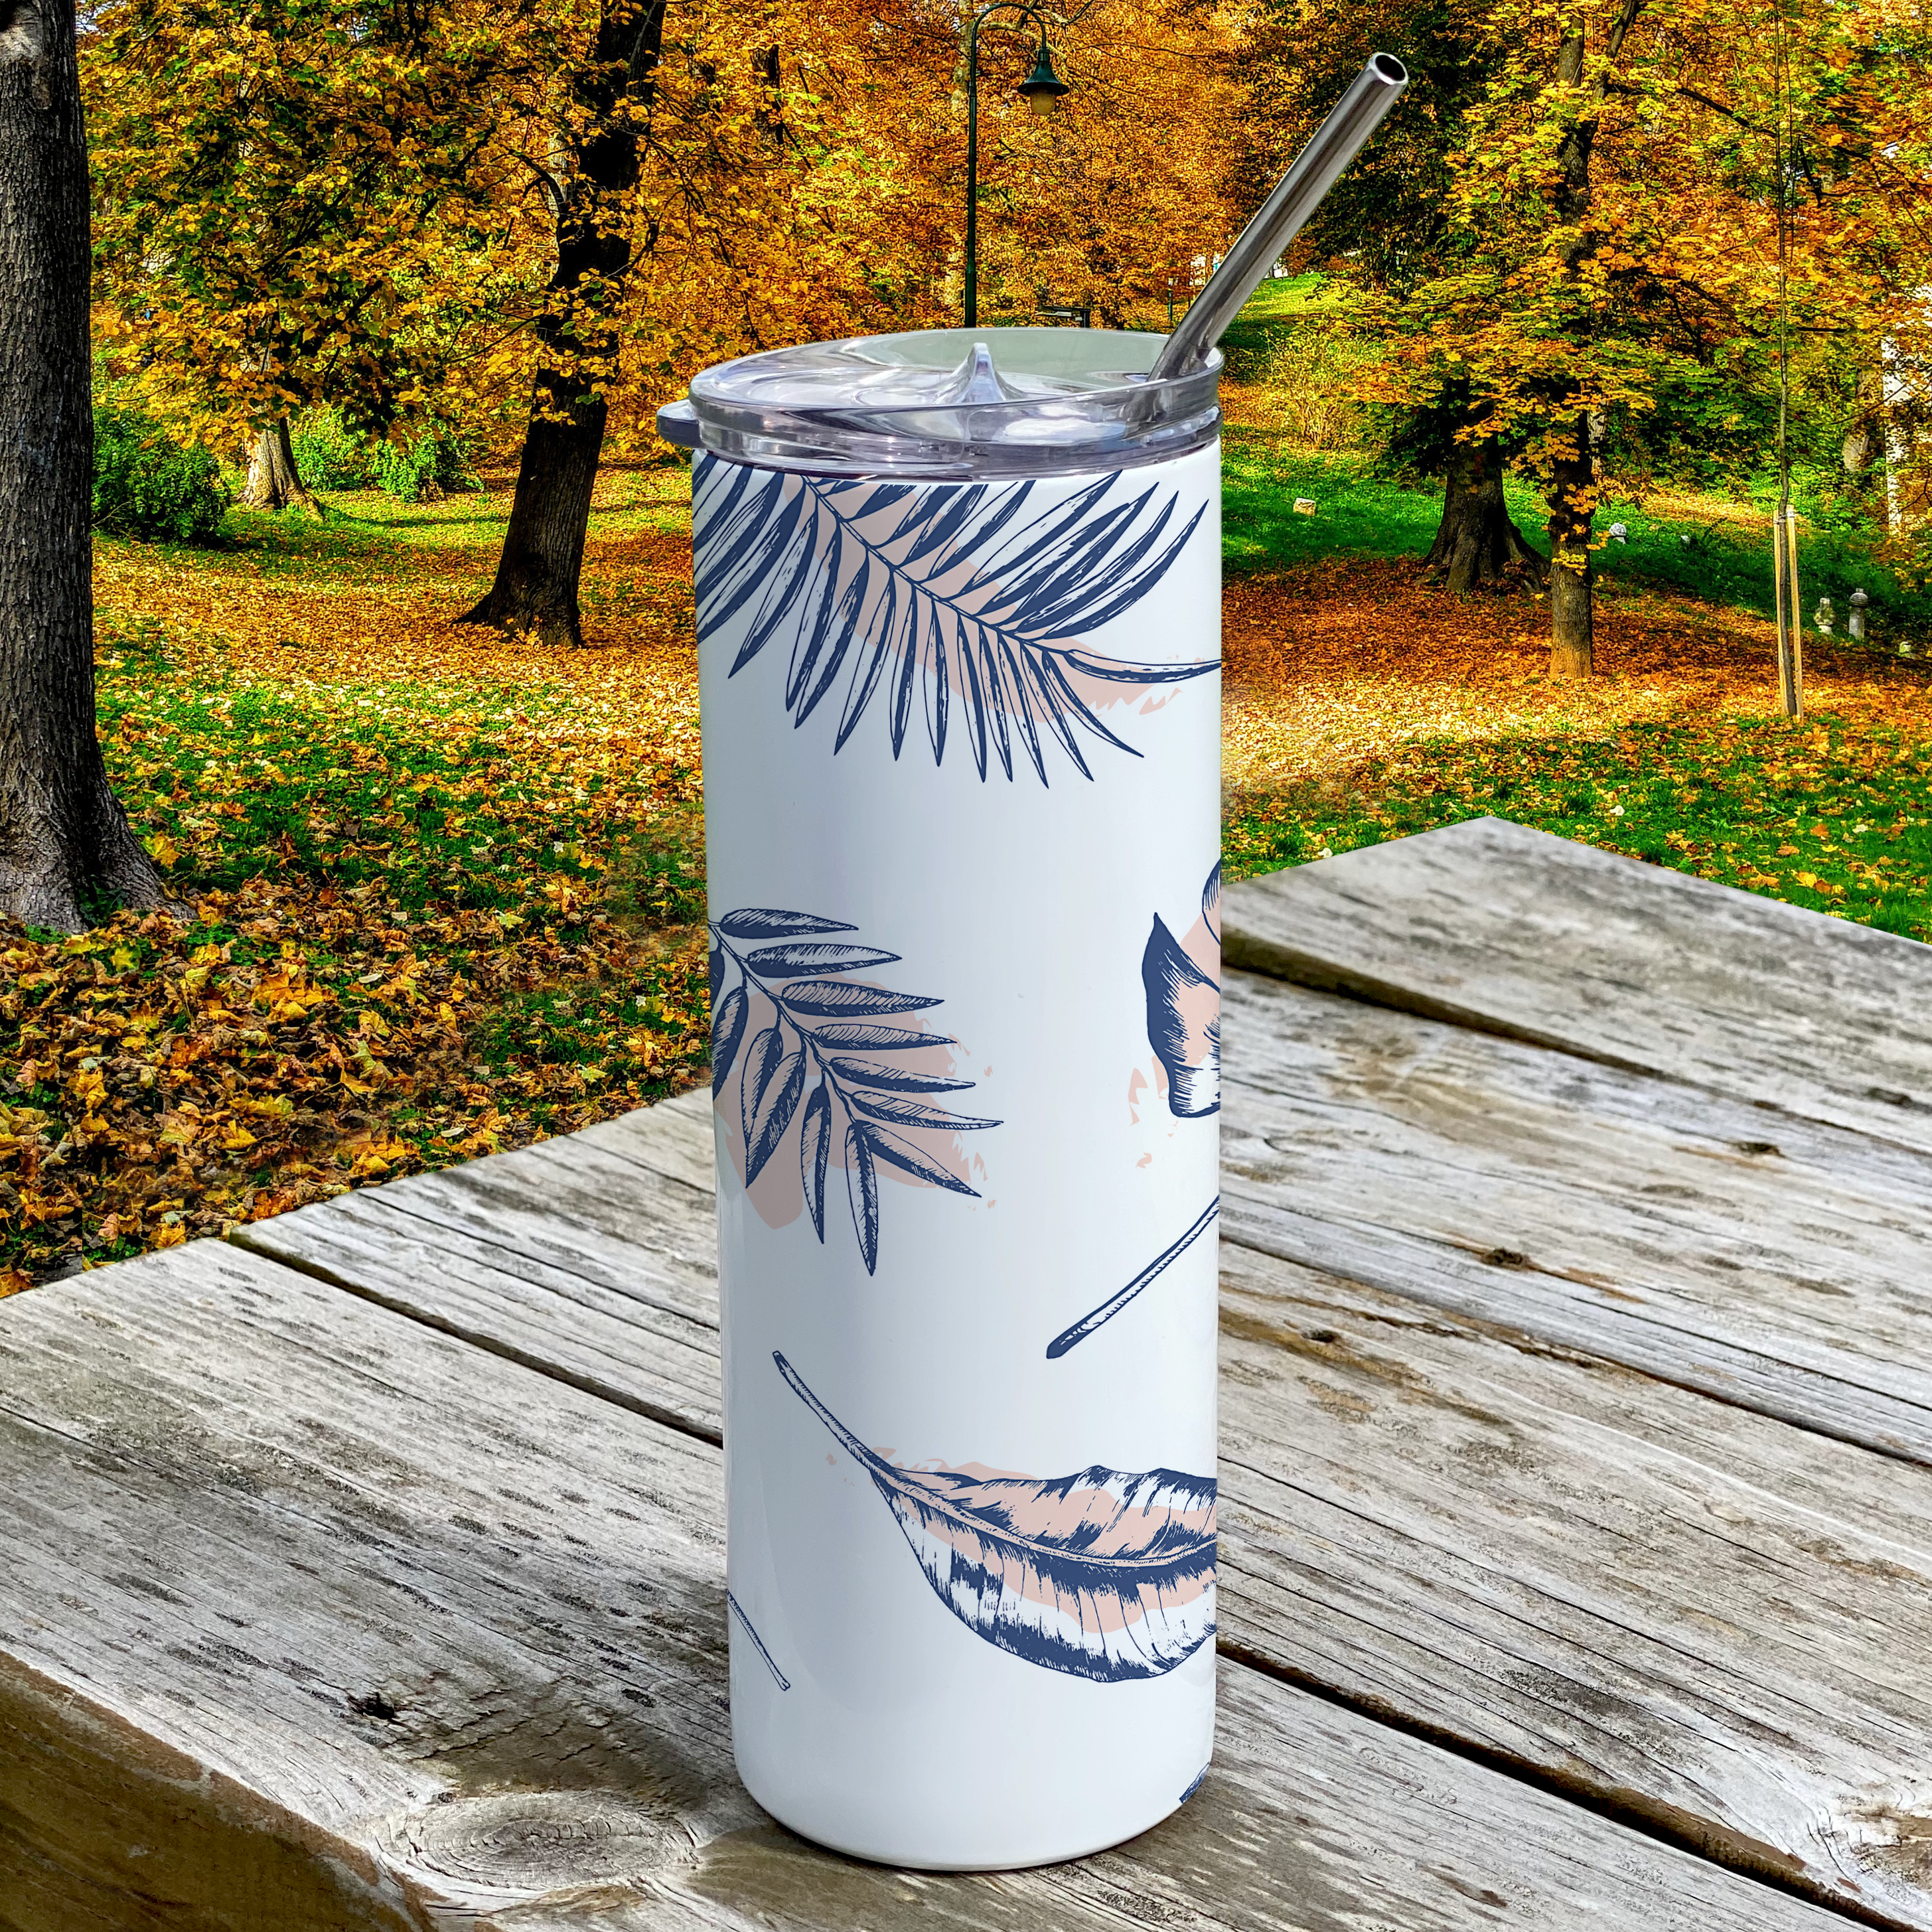 Trend Setters Originals (Neutral Palms) 20 Oz Stainless Steel Travel Tumbler with Straw